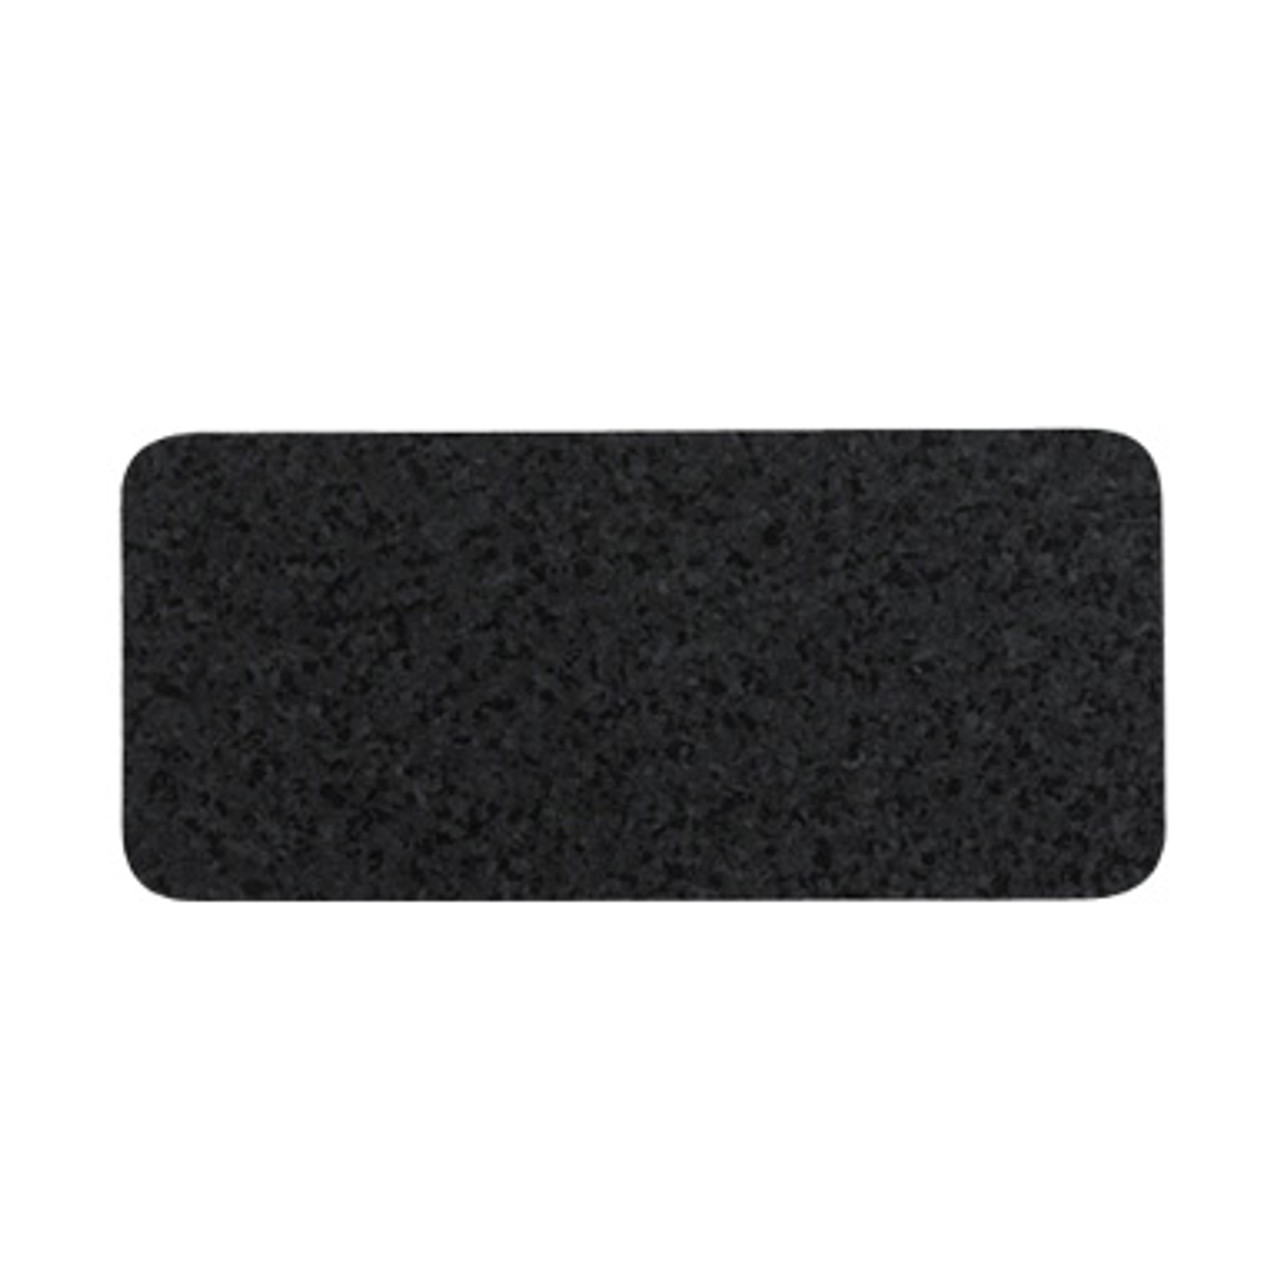 Skinny Recycled Rubber Rectangle Placemat